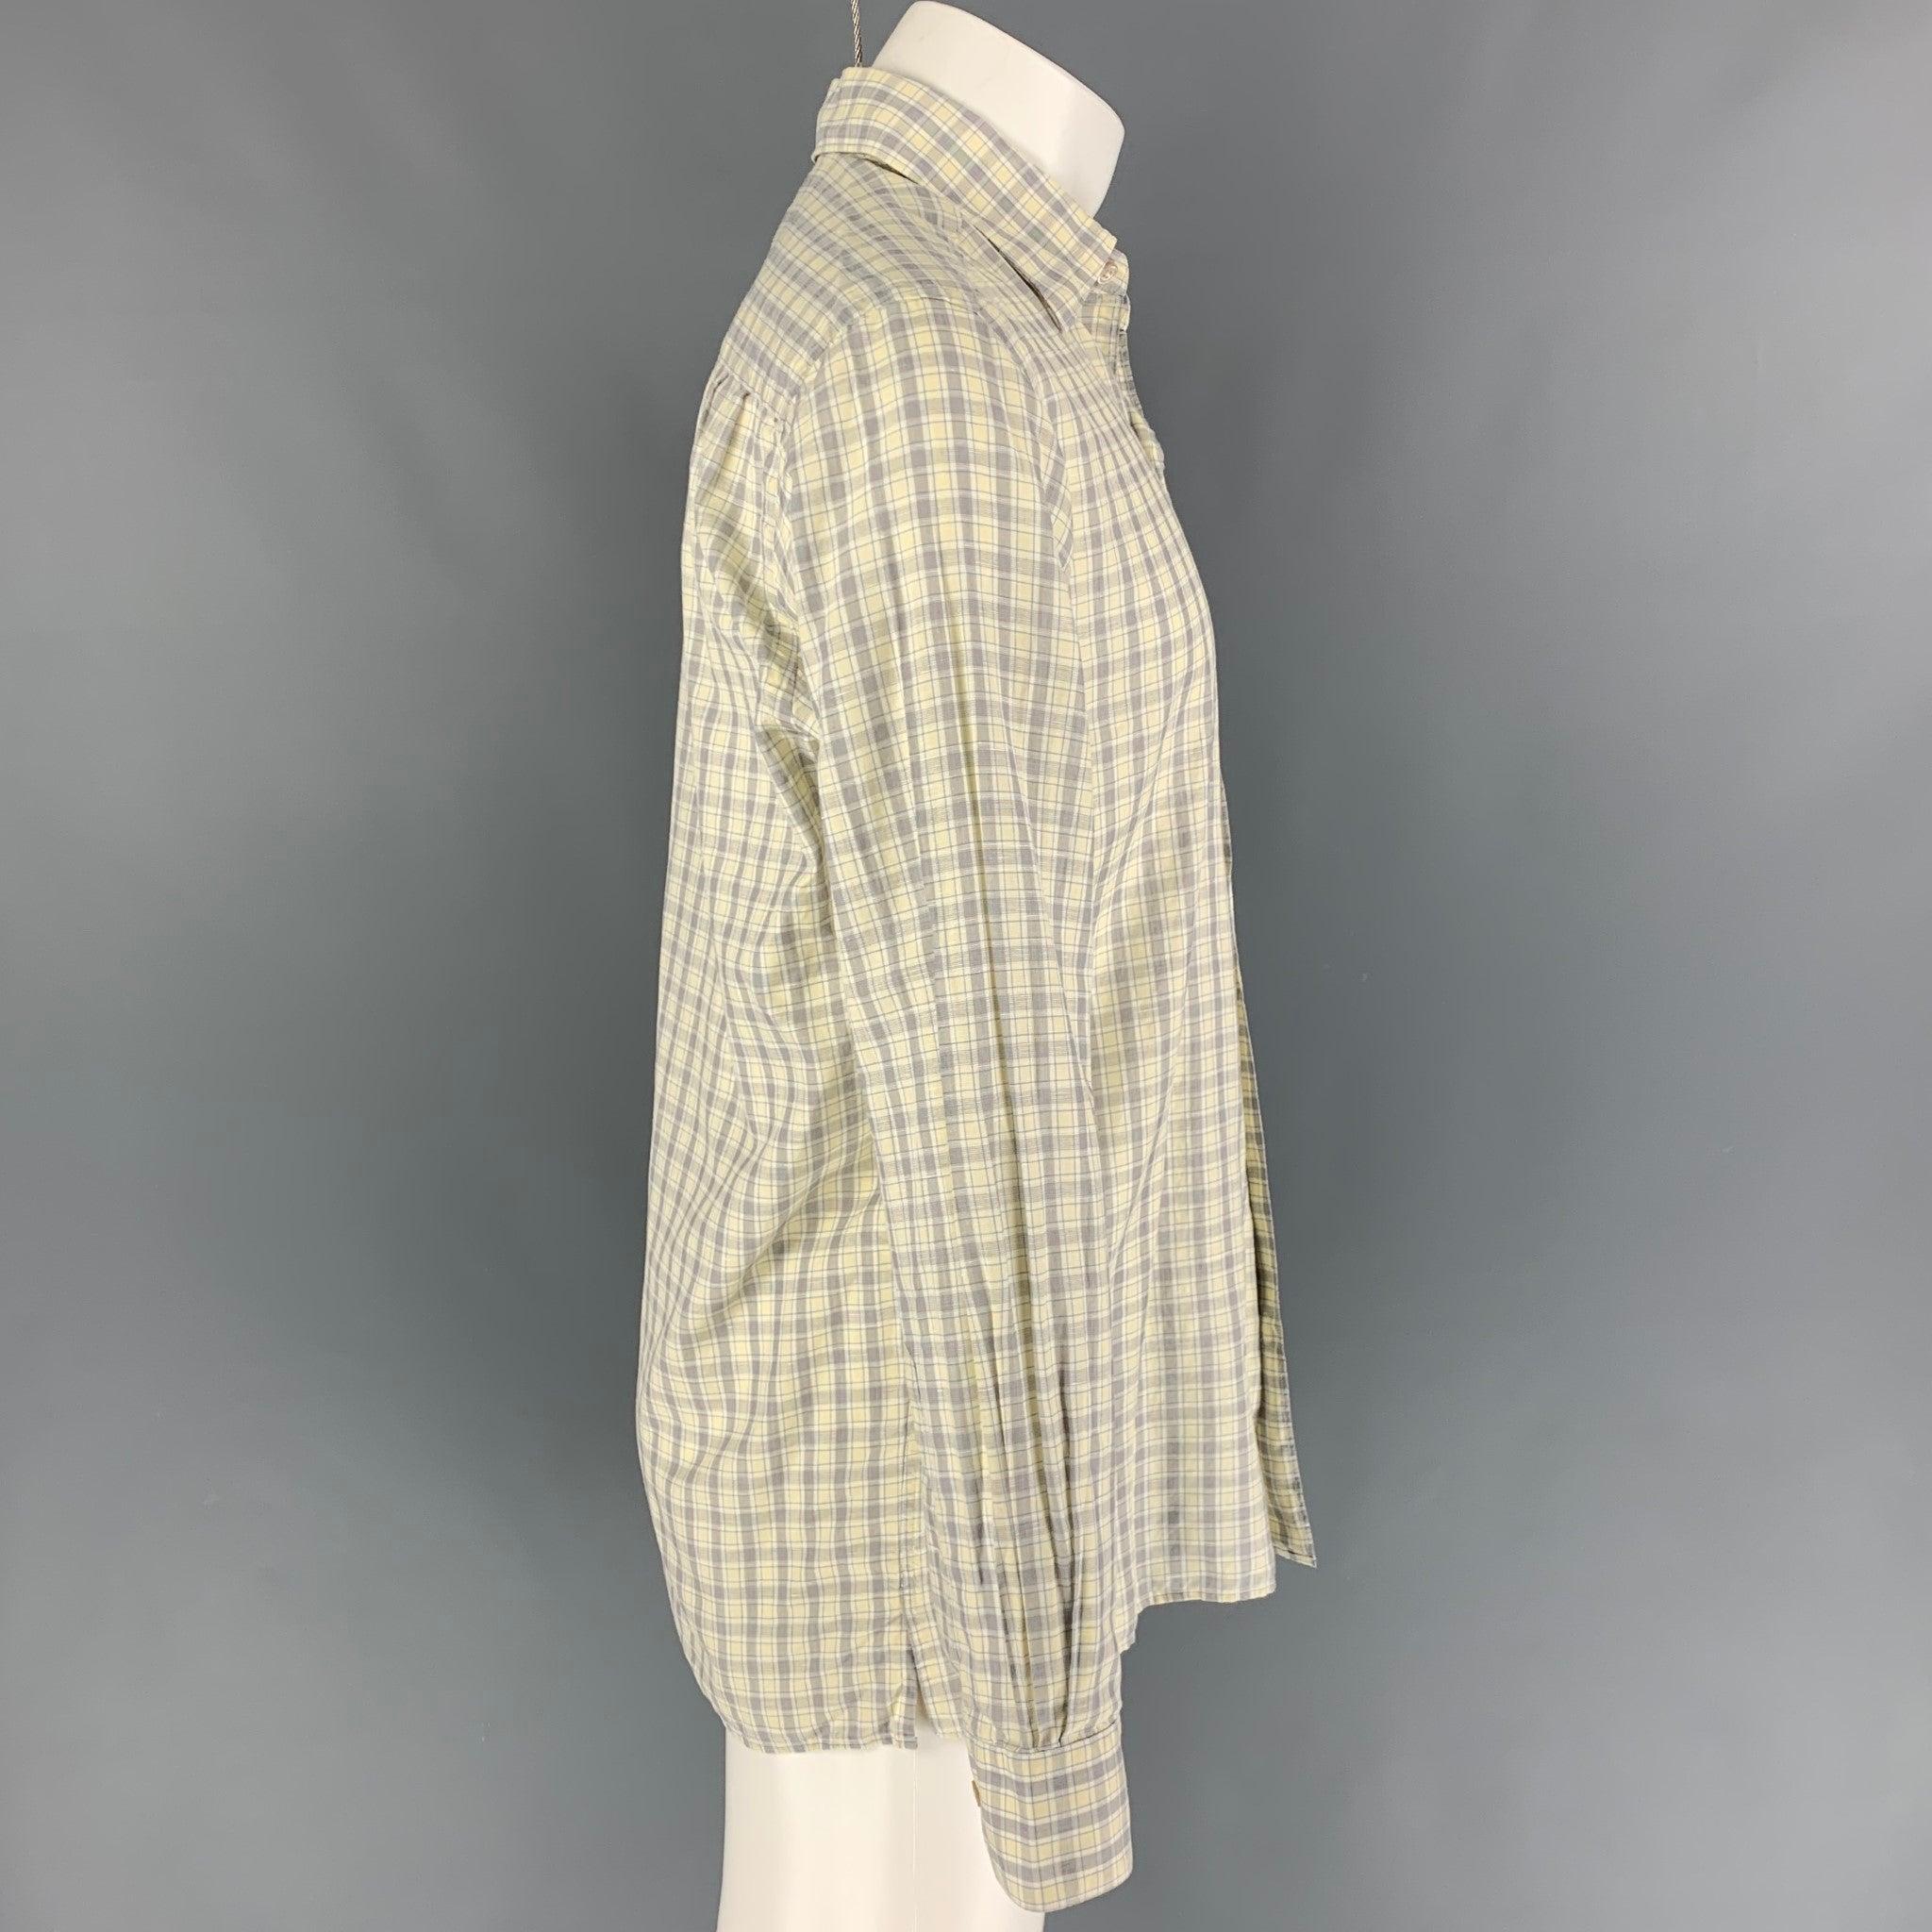 ERMENEGILDO ZEGNA long sleeve shirt comes in a yellow & blue plaid cotton featuring a spread collar and a button up closure.
Very Good
Pre-Owned Condition. 

Marked:   M  

Measurements: 
 
Shoulder: 18 inches  Chest: 42 inches  Sleeve: 26 inches 